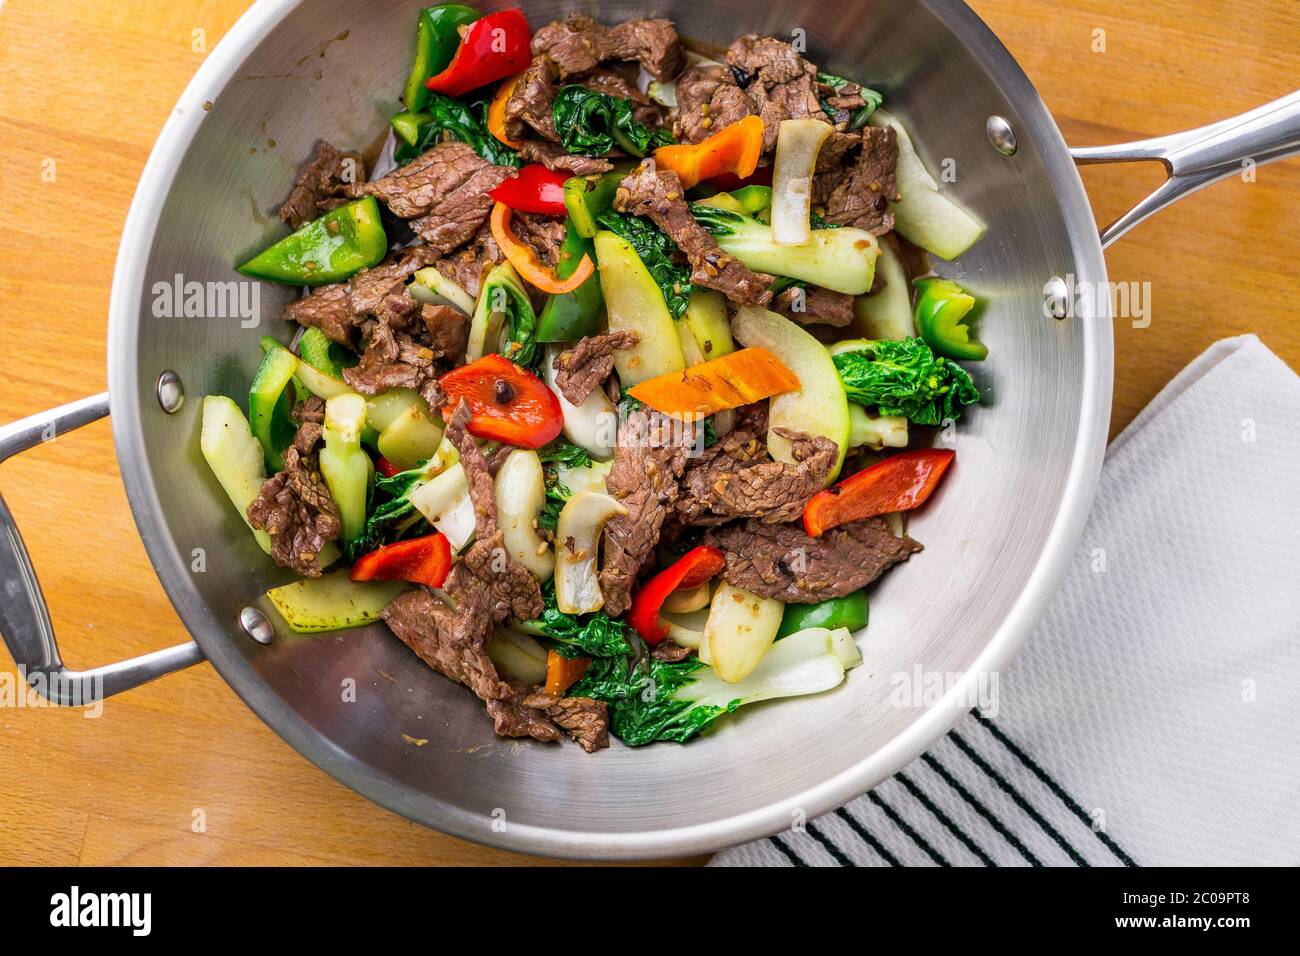 Healthy vegetable & beef stir-fry. Made with flank steak, peppers, onions and bok choy stir fried in an asian wok. Stock Photo